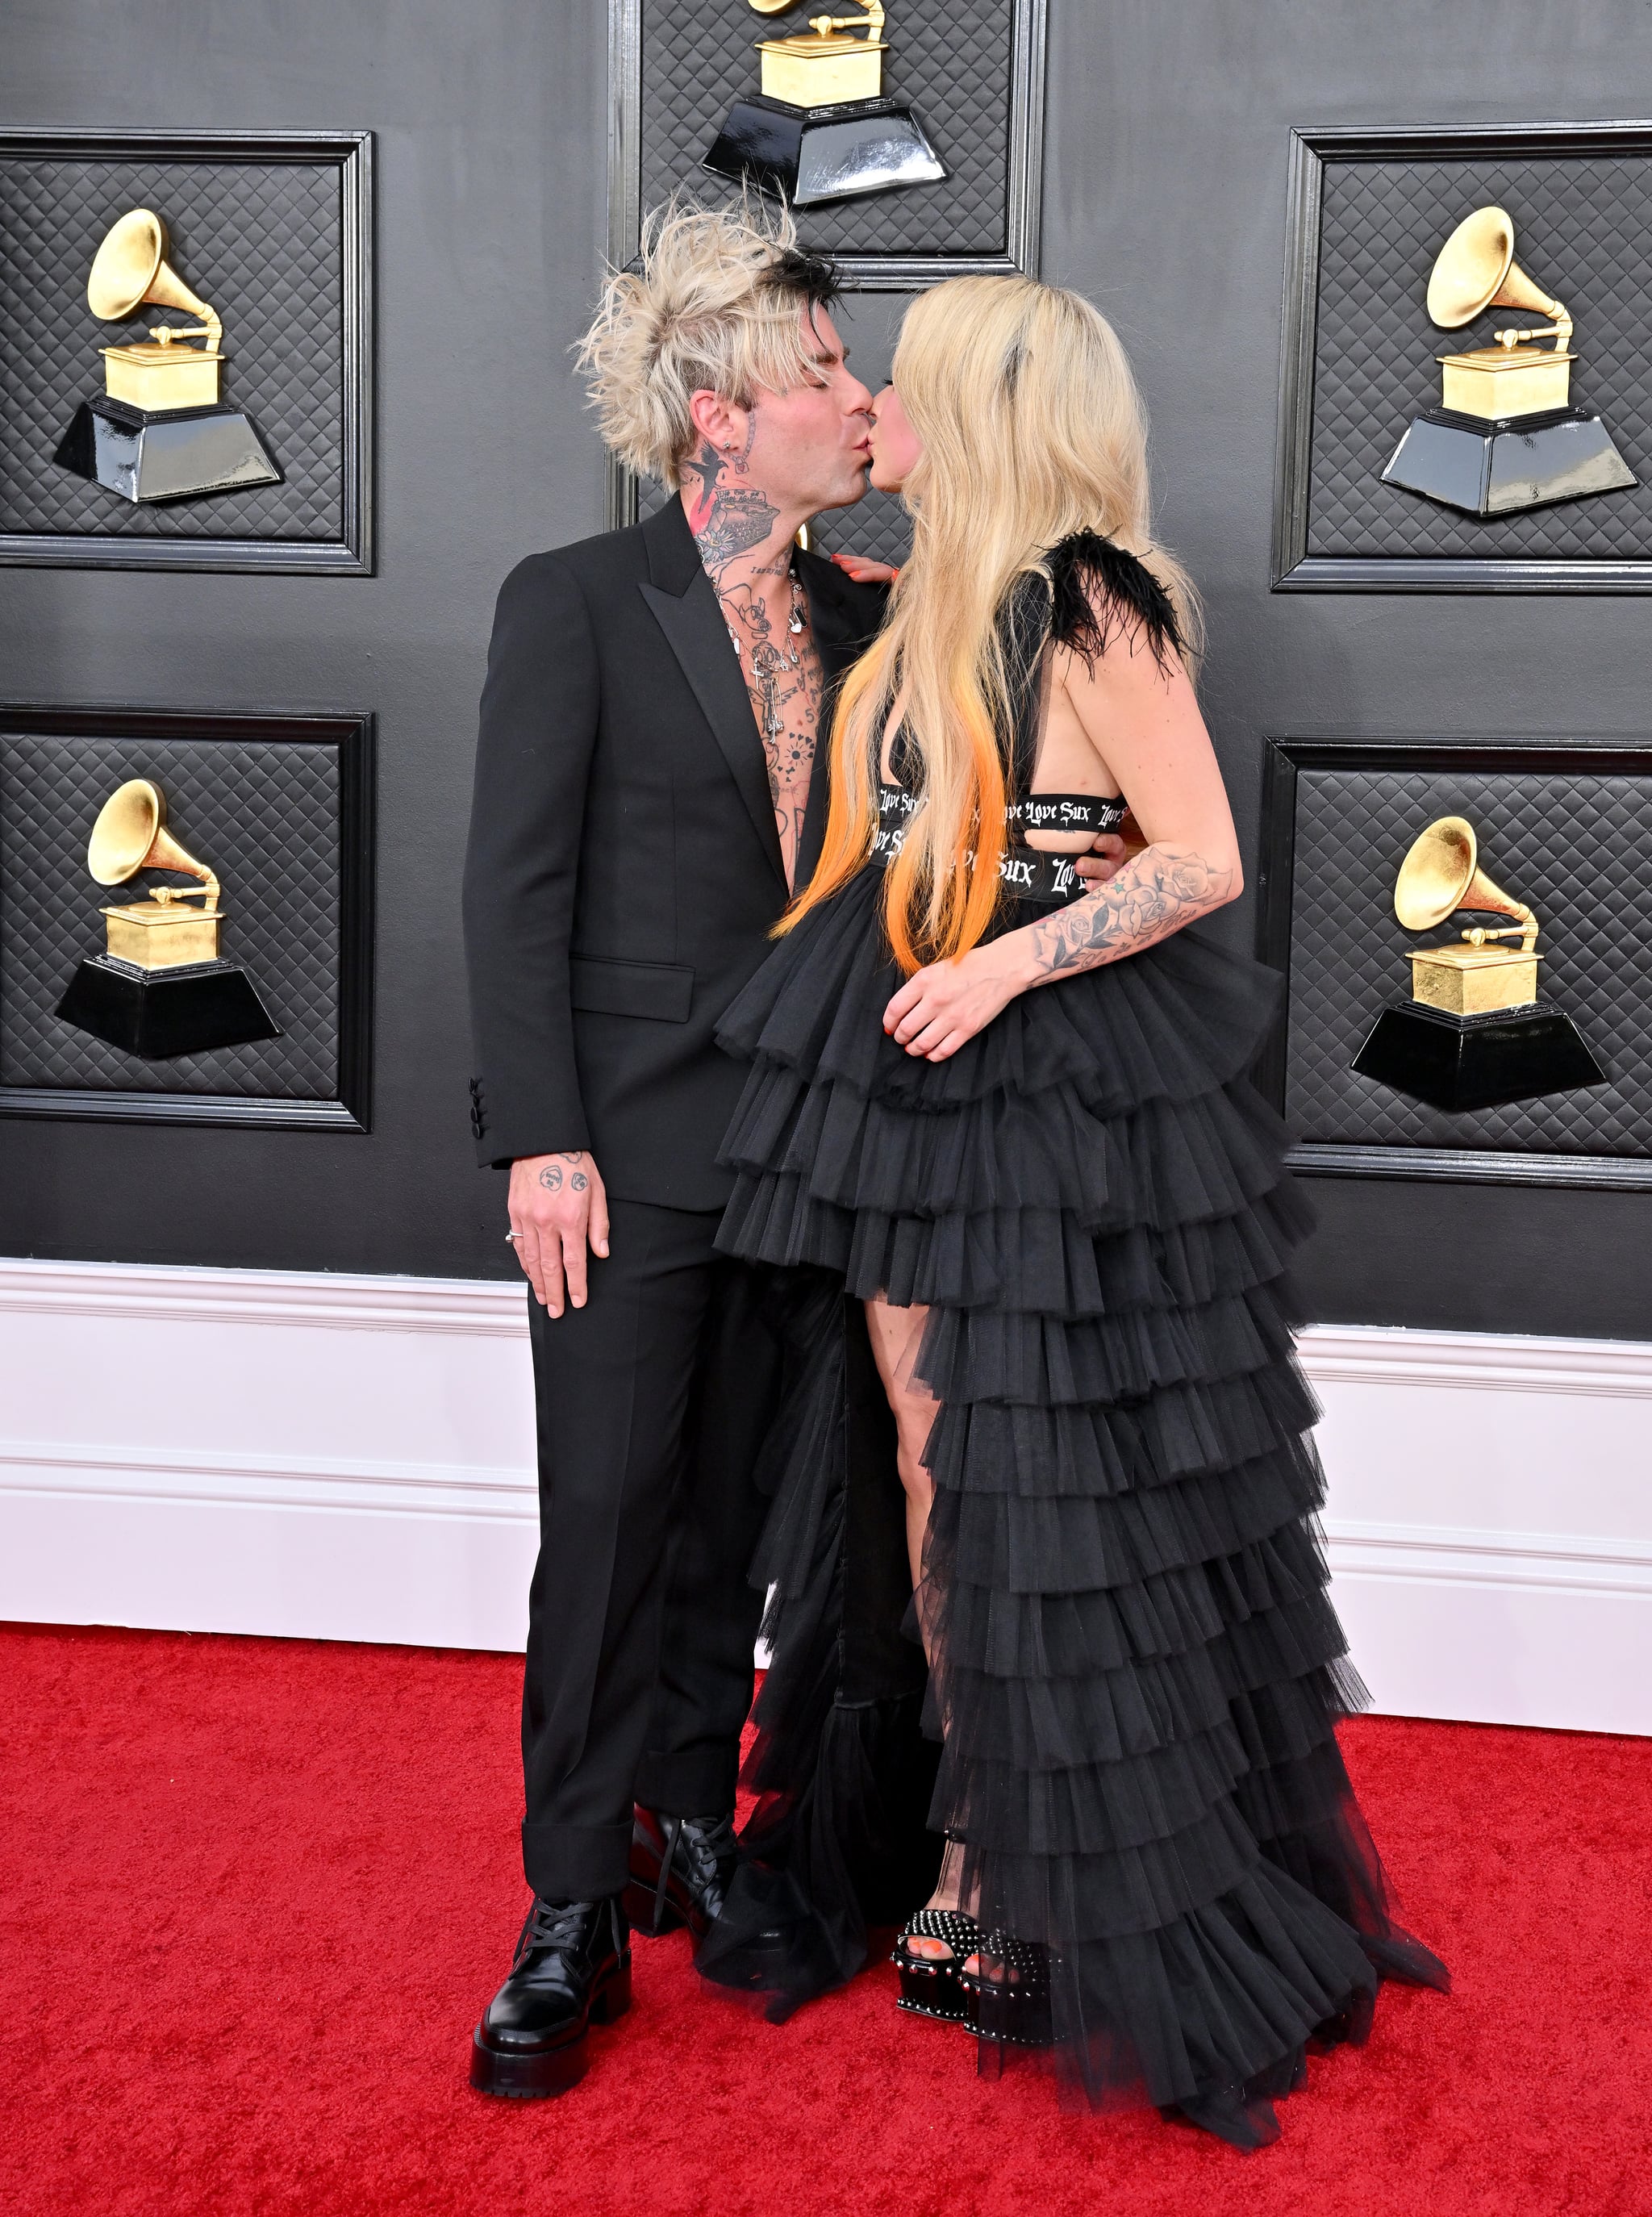 LAS VEGAS, NEVADA - APRIL 03: Mod Sun and Avril Lavigne attend the 64th Annual GRAMMY Awards at MGM Grand Garden Arena on April 03, 2022 in Las Vegas, Nevada. (Photo by Axelle/Bauer-Griffin/FilmMagic)